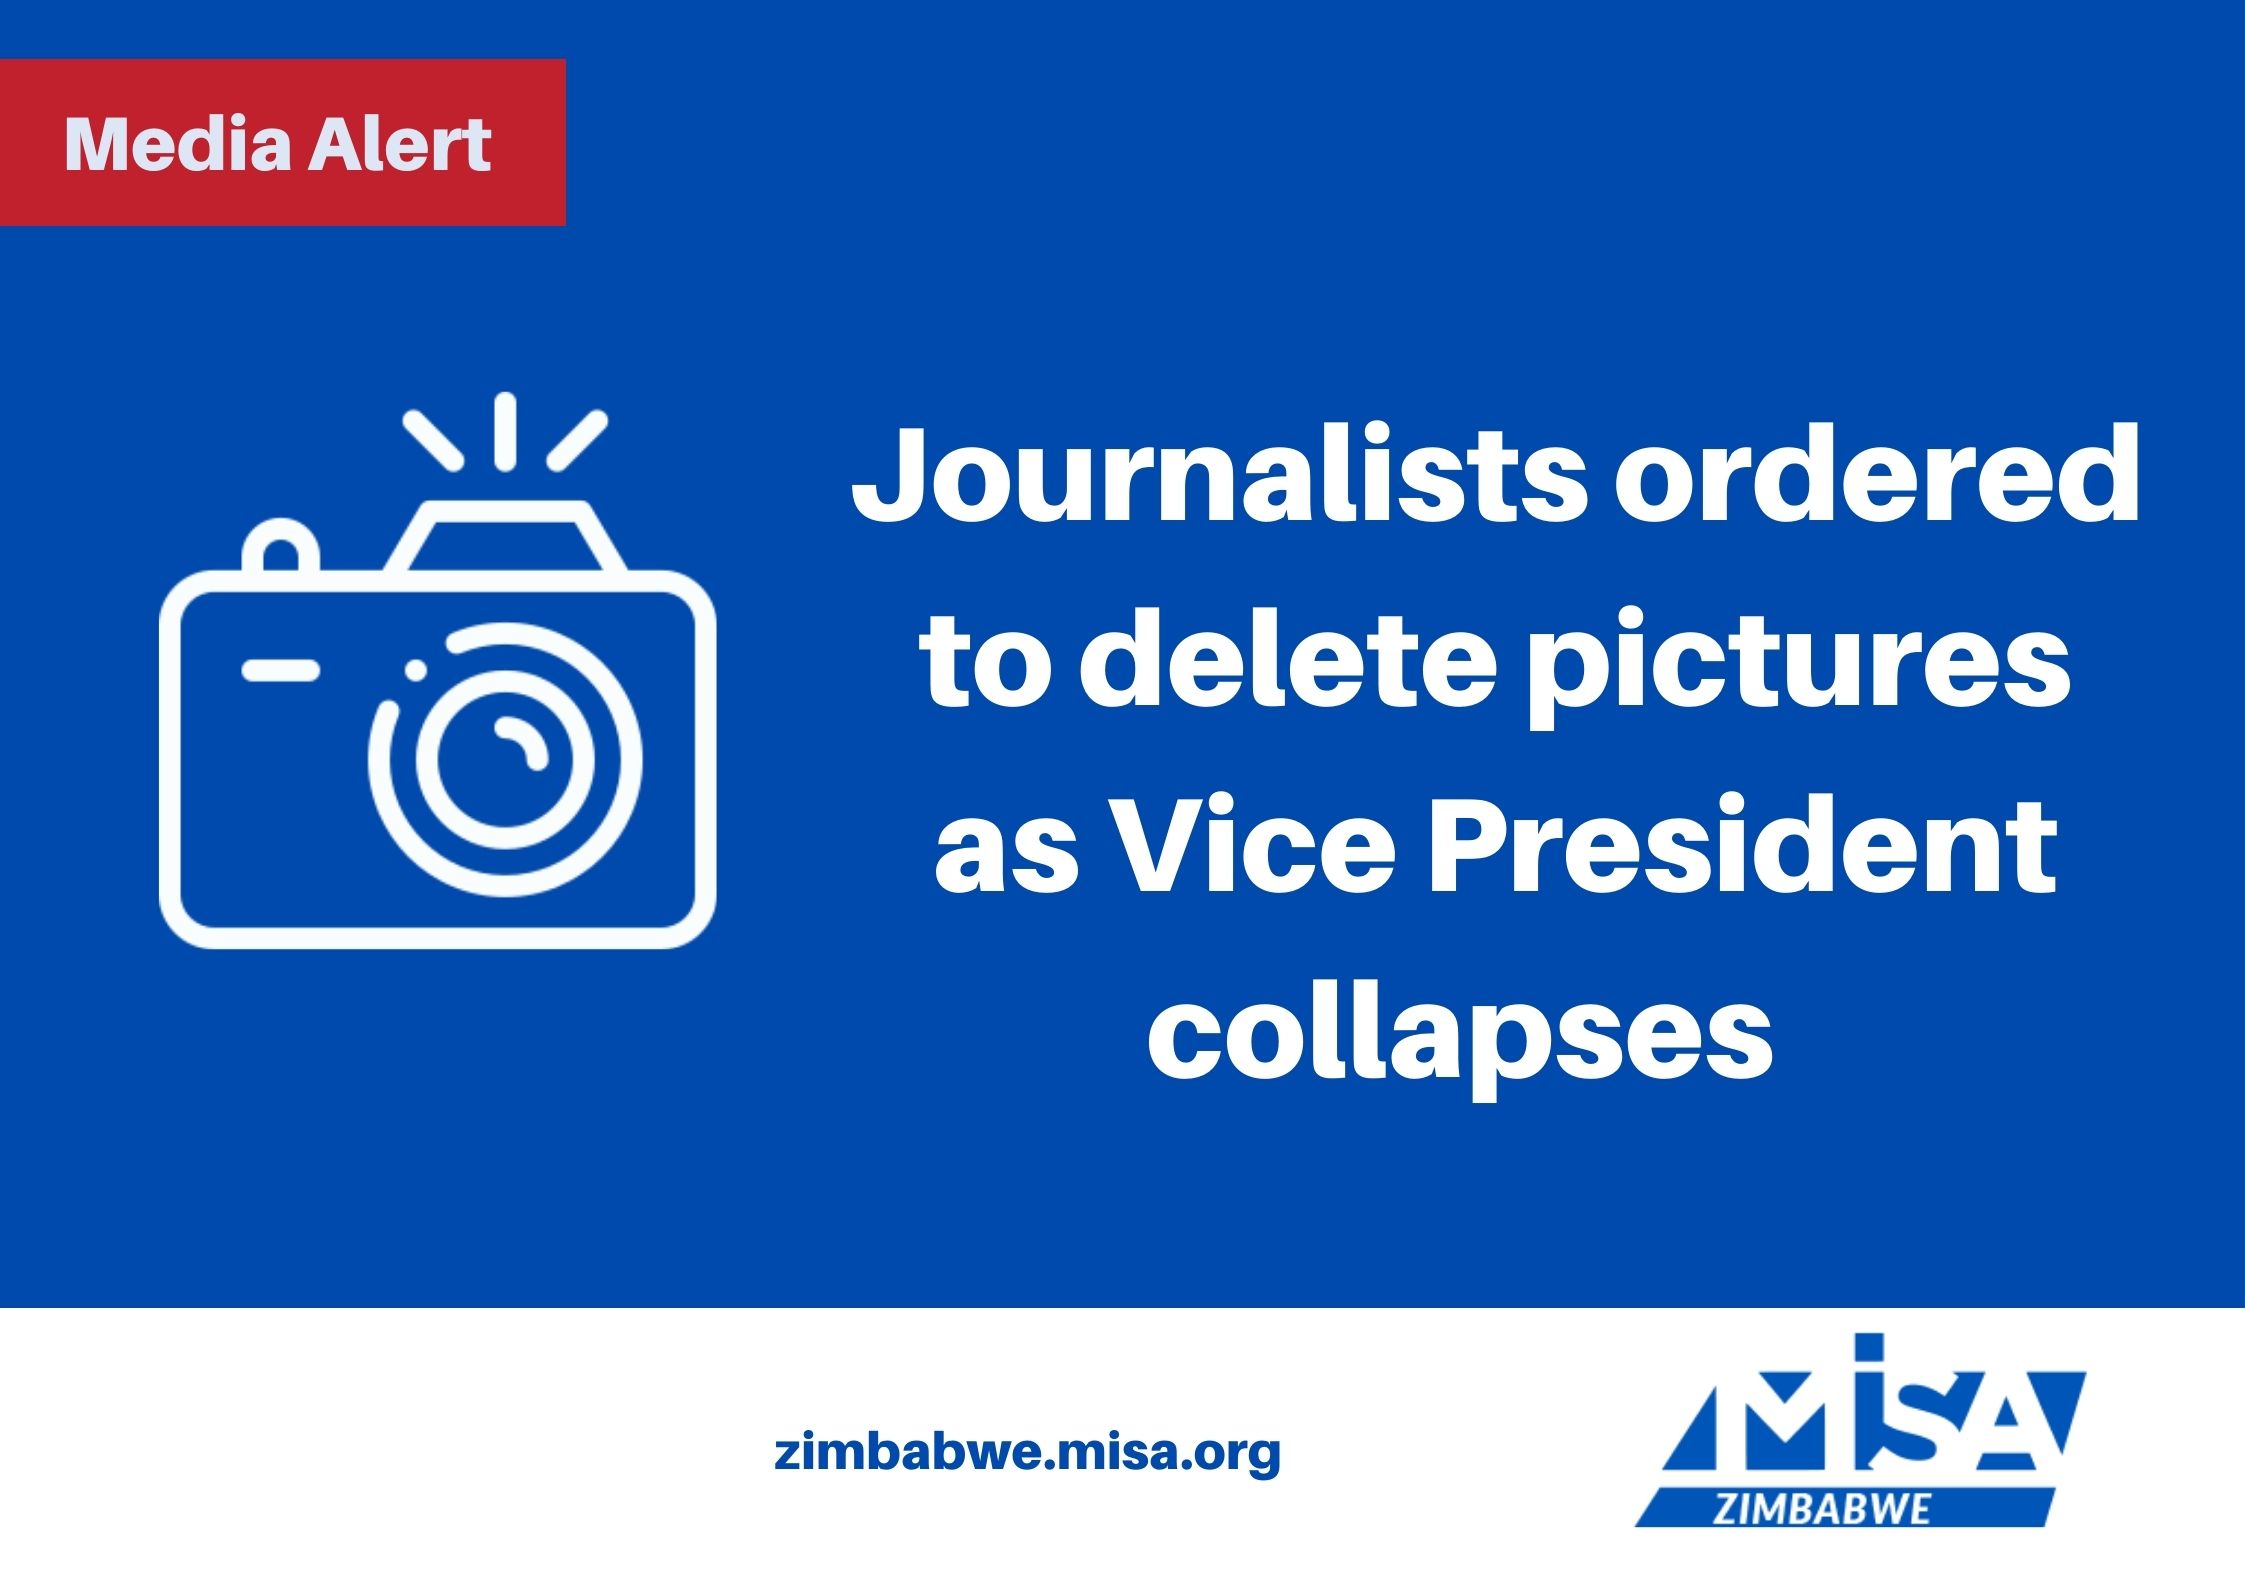 Journalists ordered to delete pictures as Vice President collapses